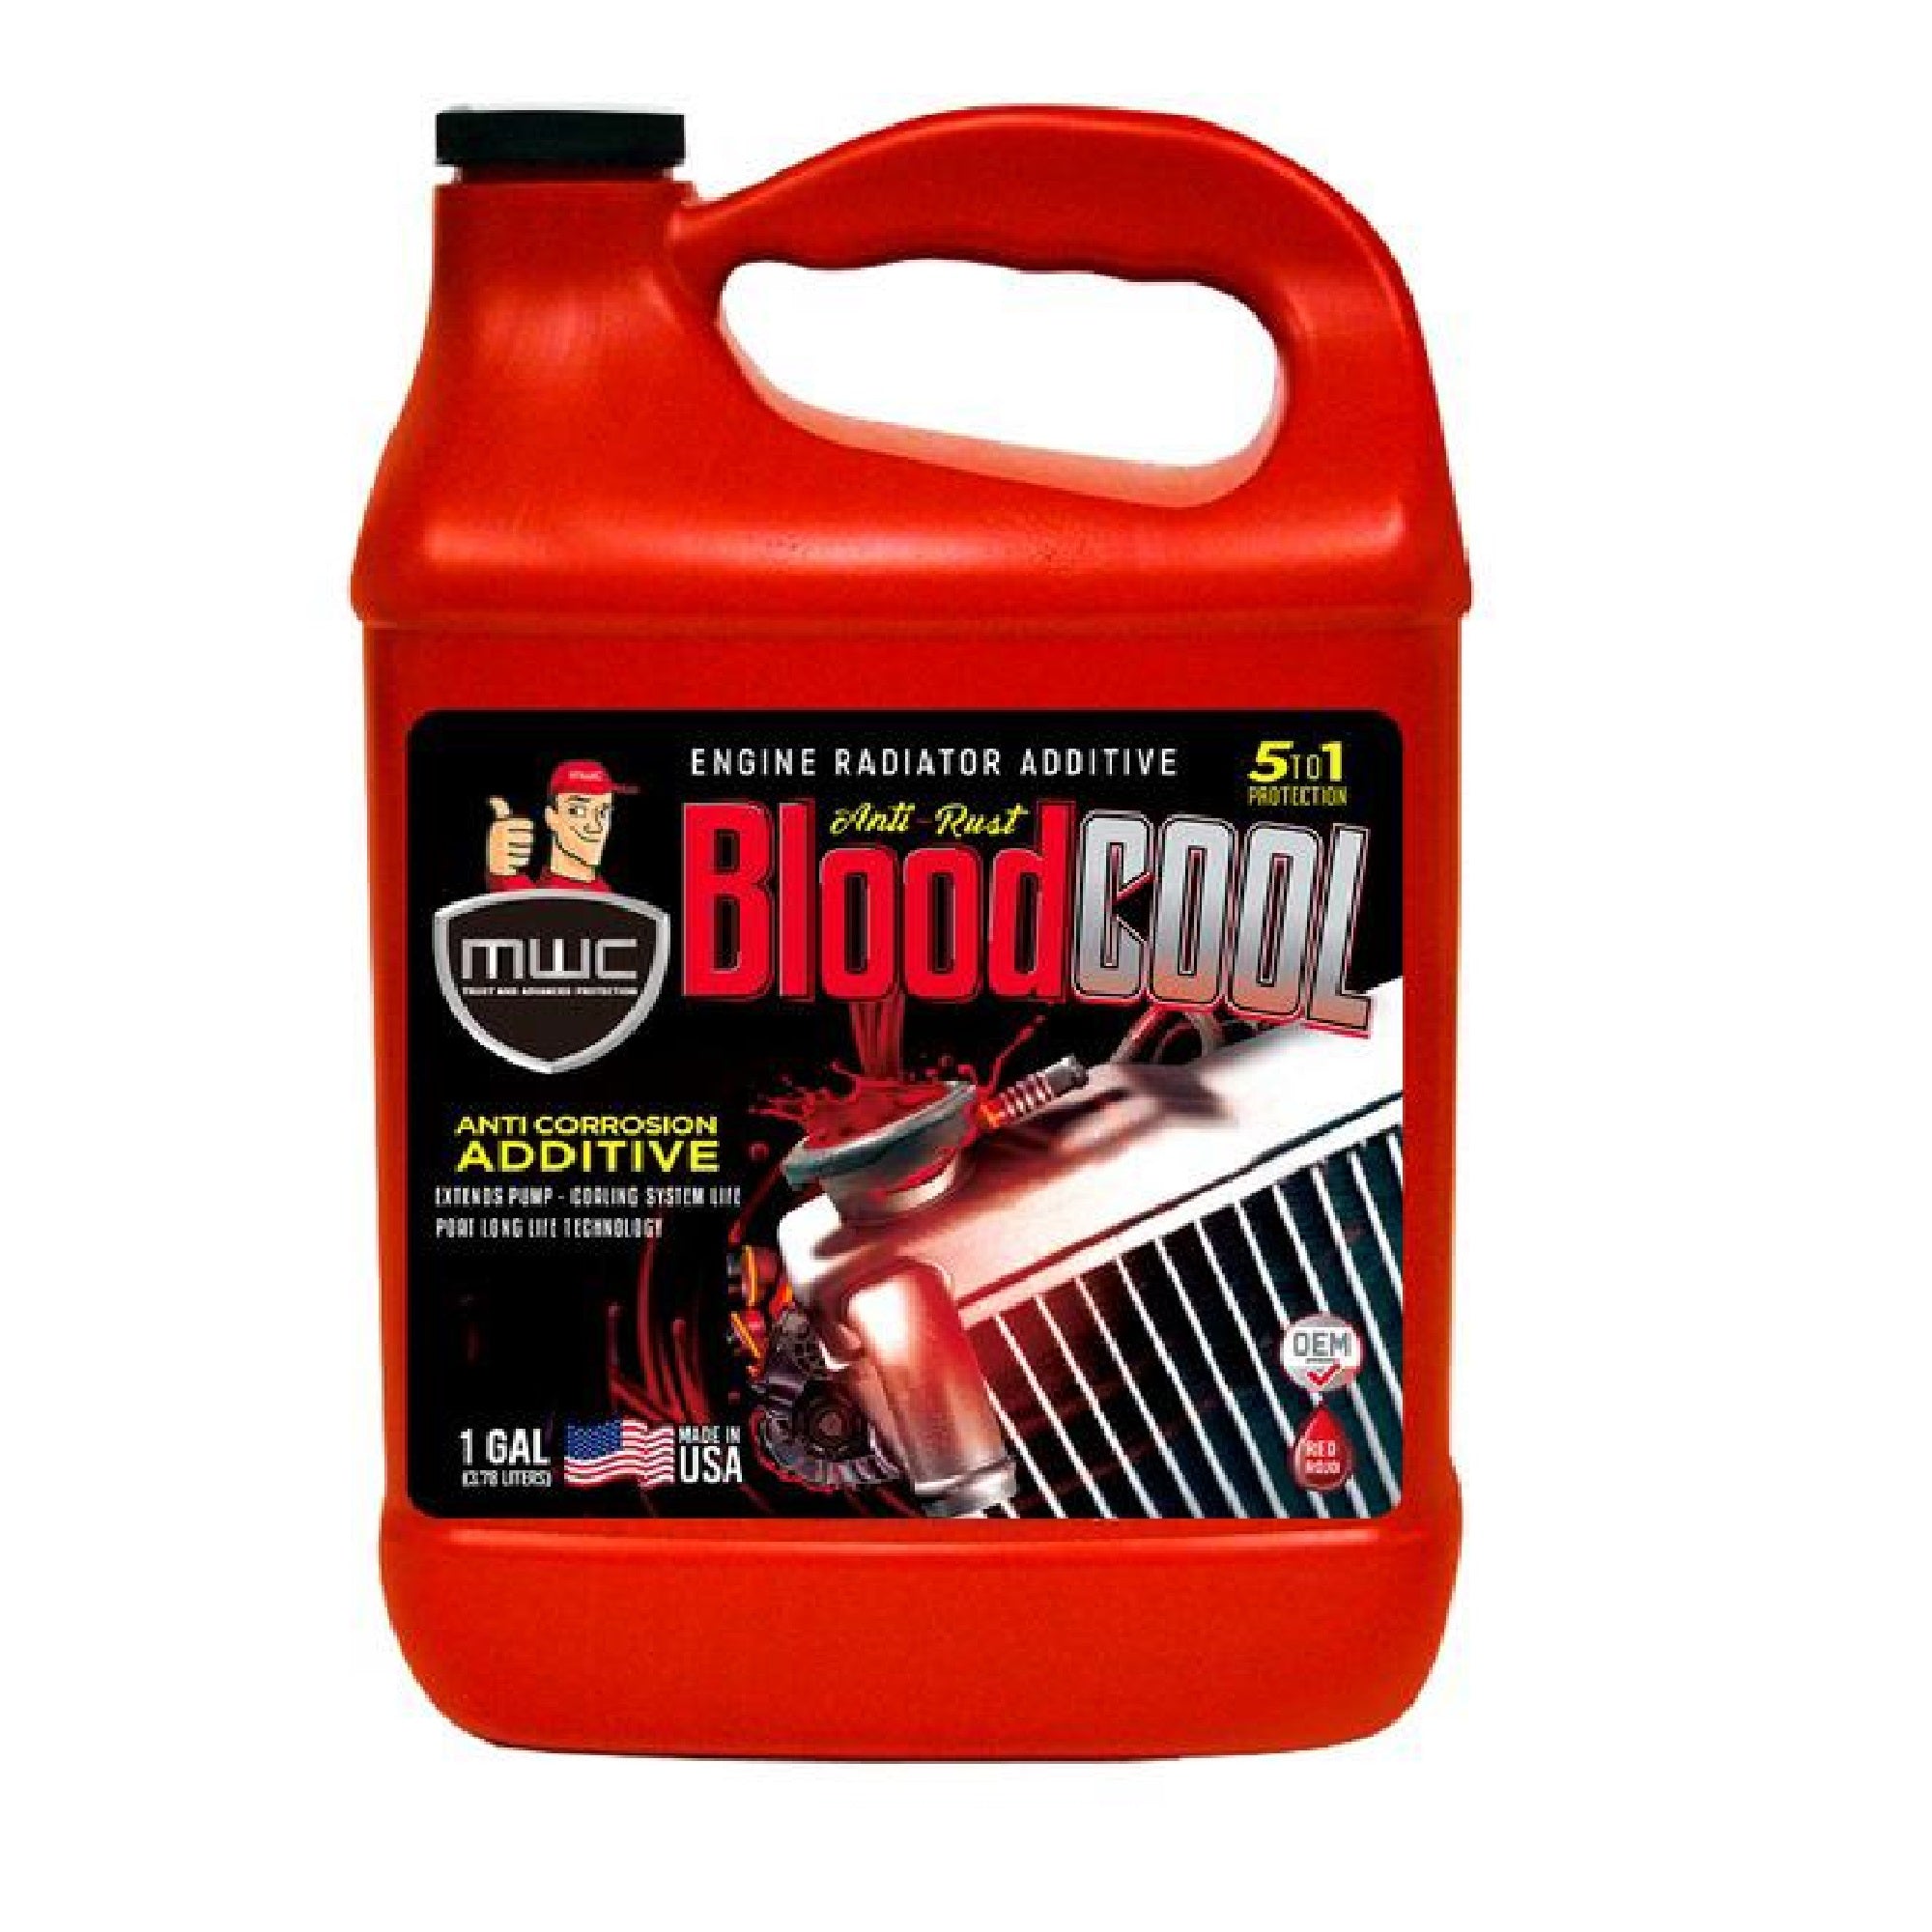 MWC Red Cool Engine Radiator Anti-Rust Additive, 1 Gallon, Protects Against Corrosion